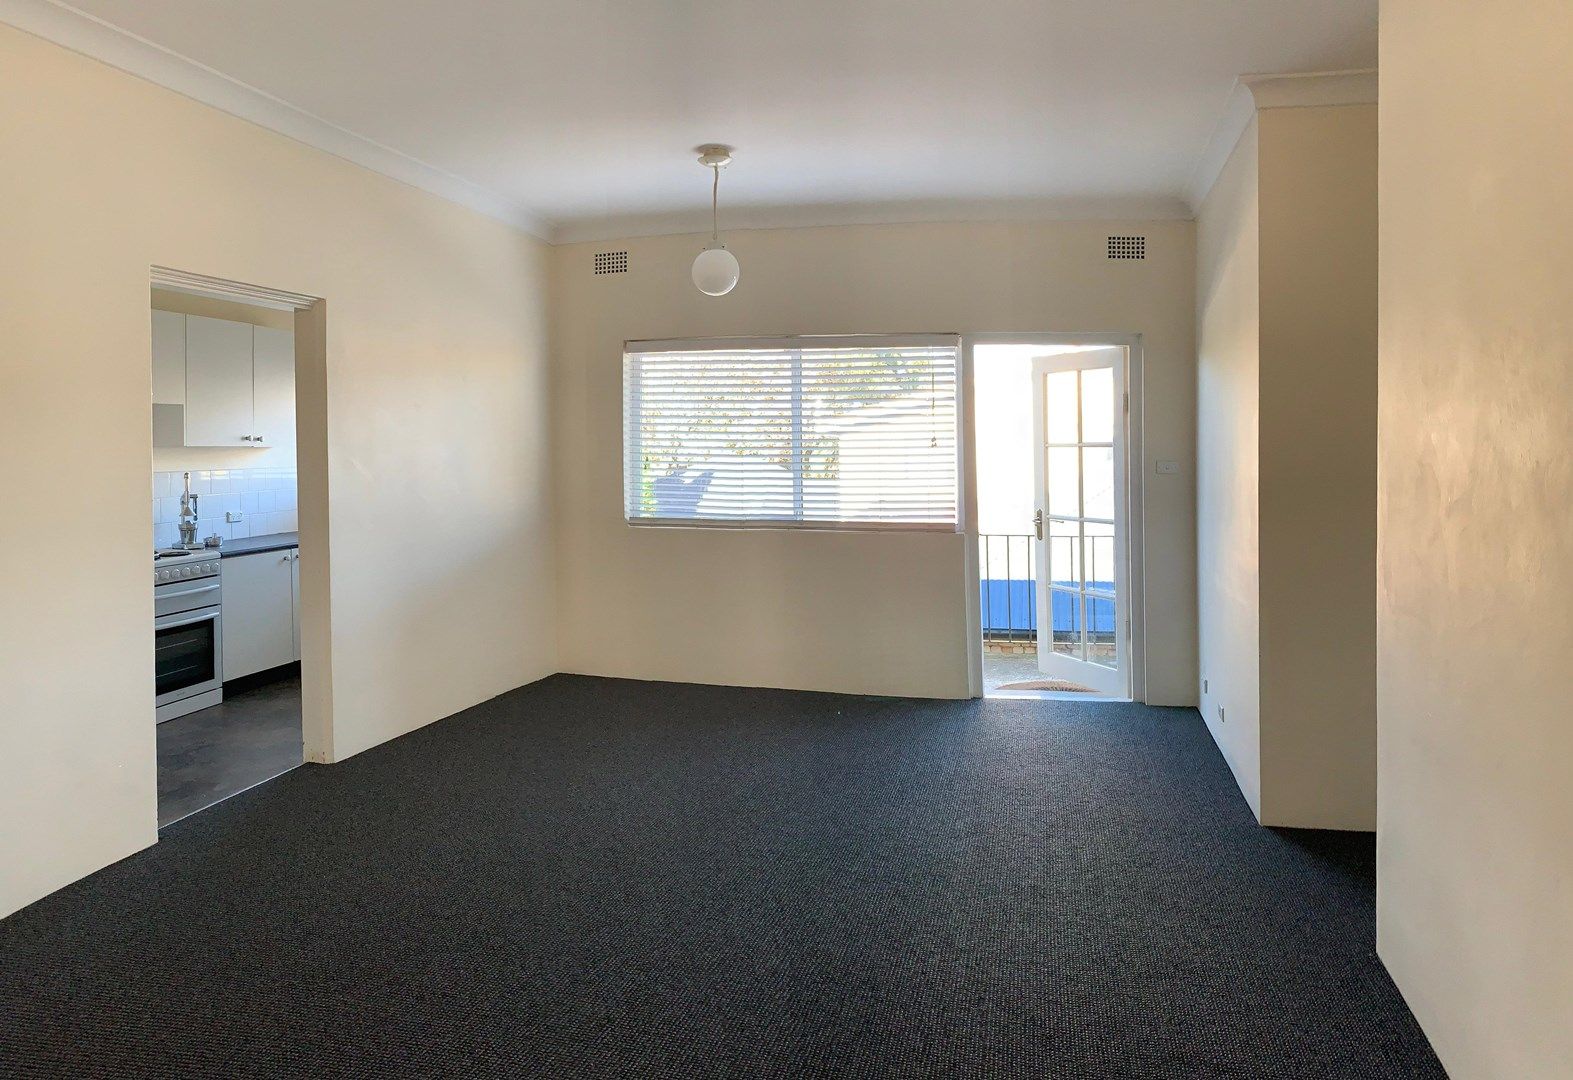 2 bedrooms Apartment / Unit / Flat in 10/187 West CROWS NEST NSW, 2065